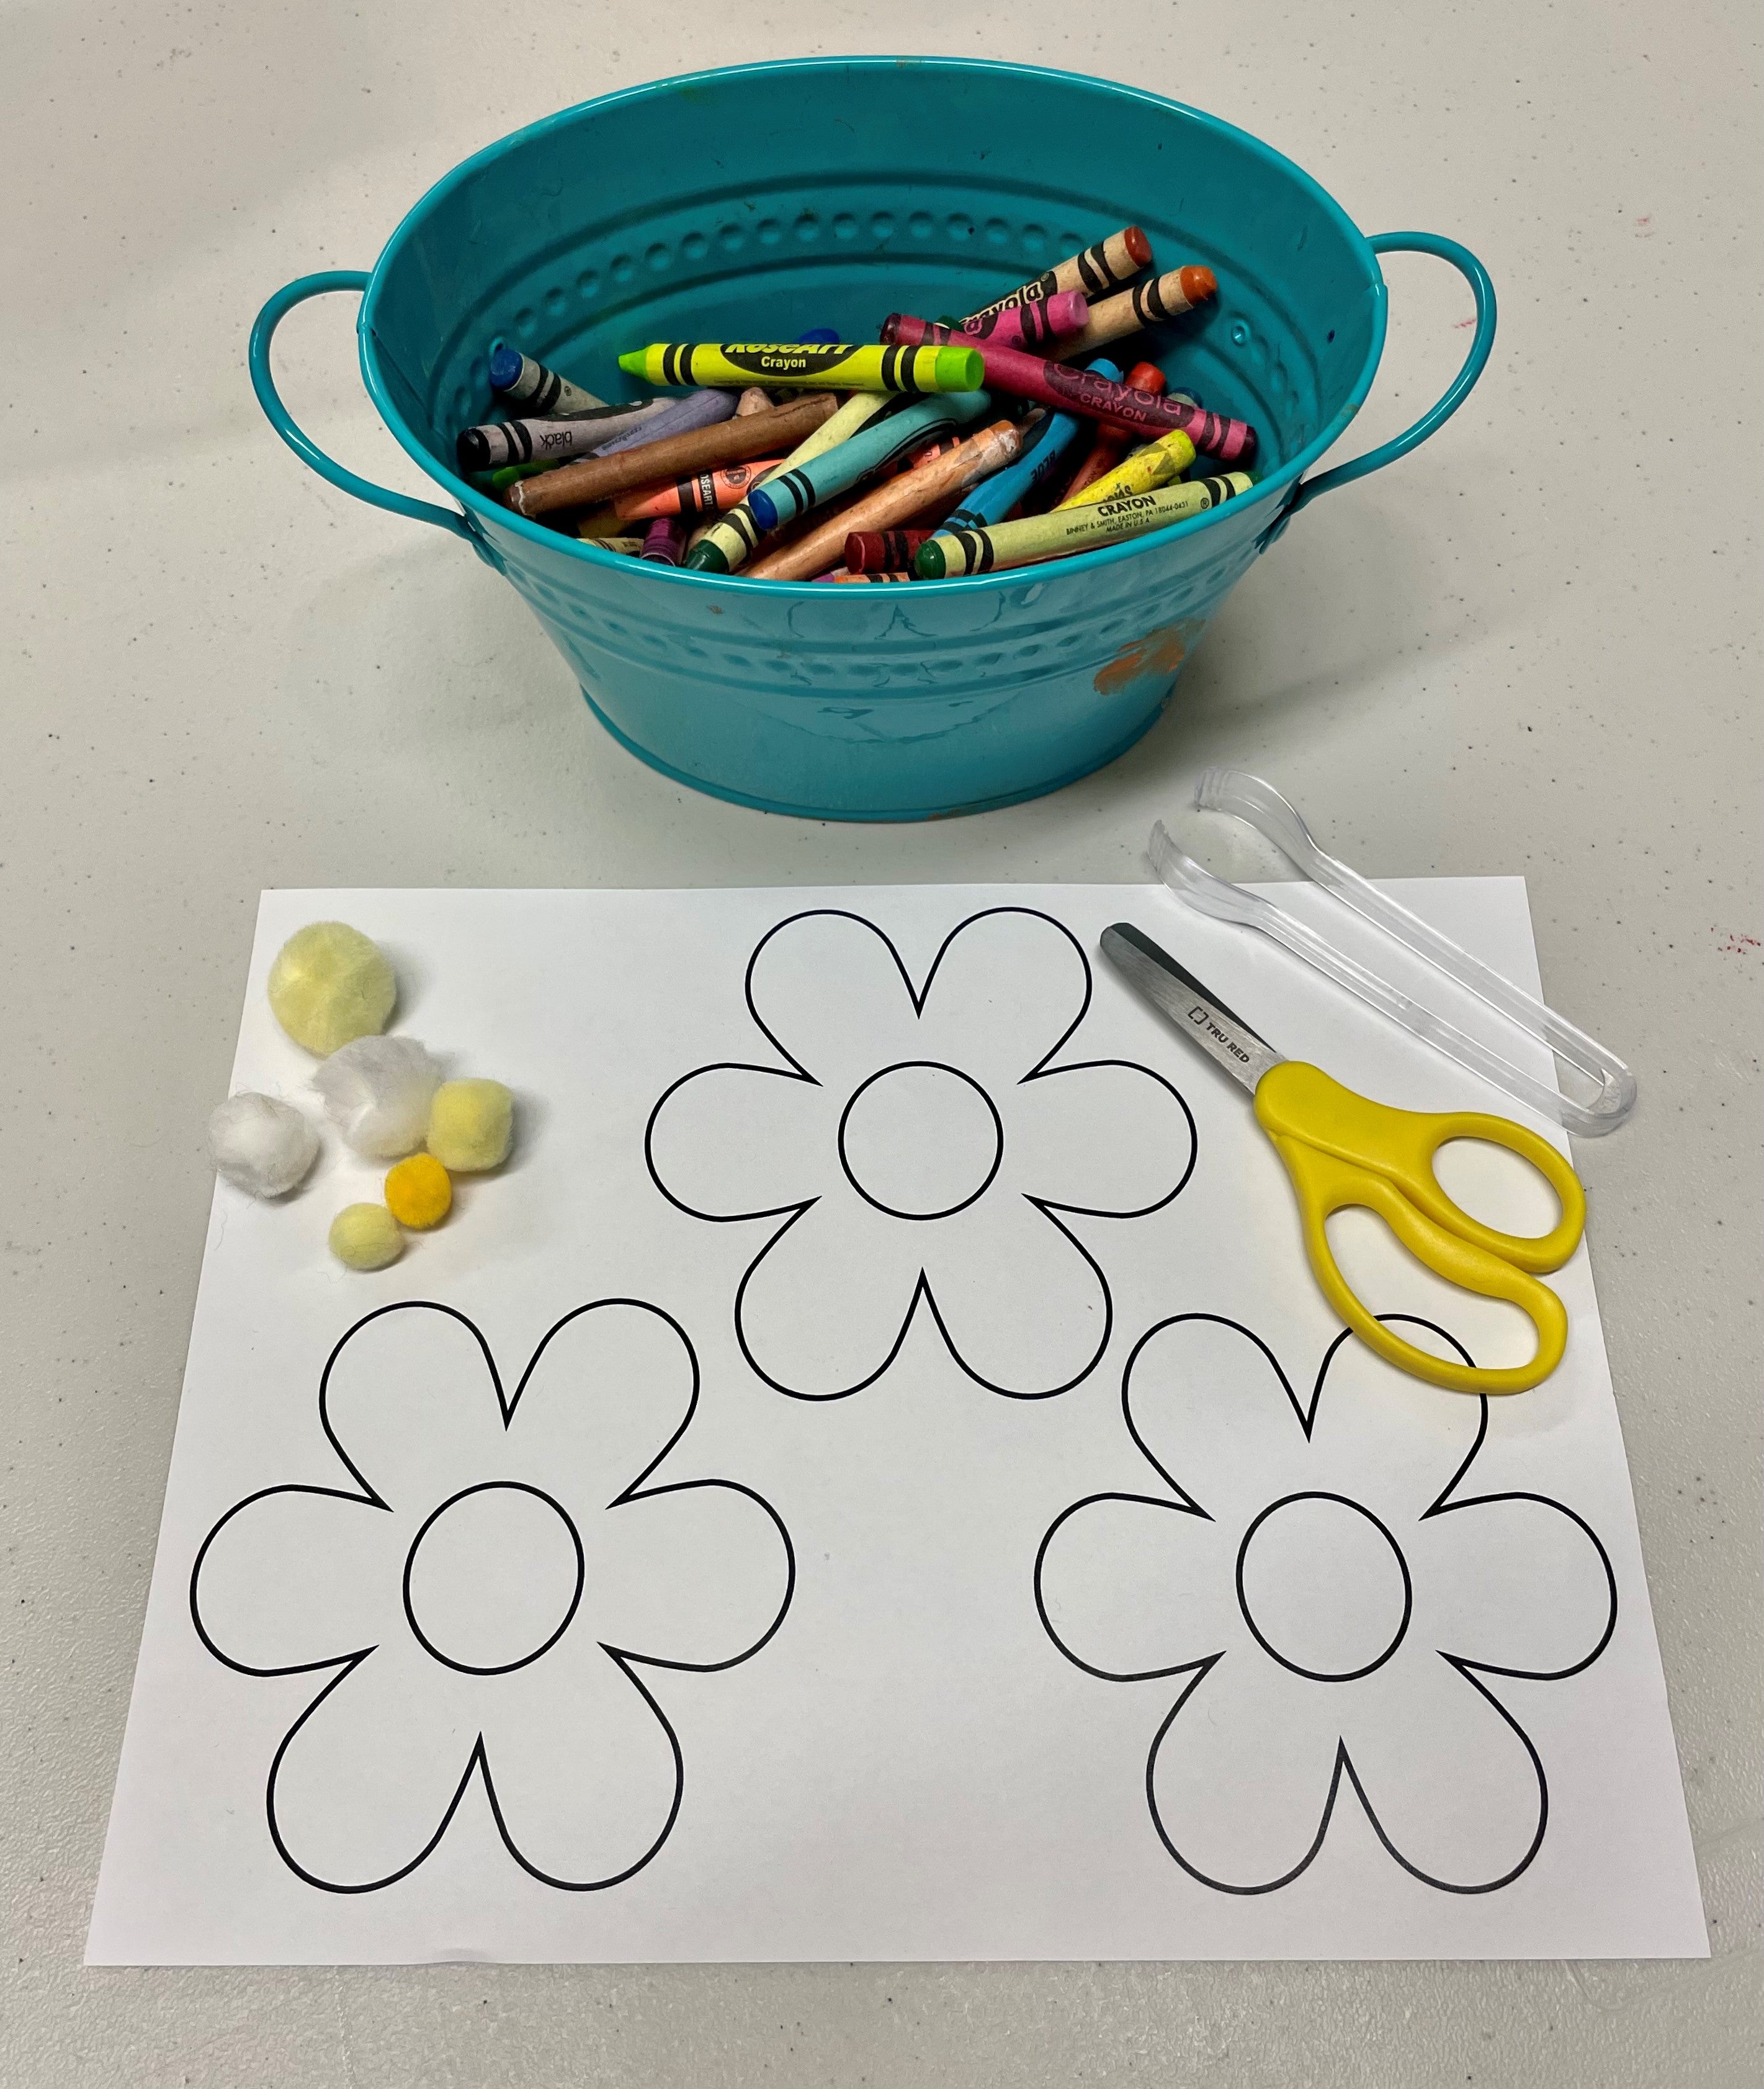 The Be a Bee activity, showing a flower template and a green bowl full of colorful crayons